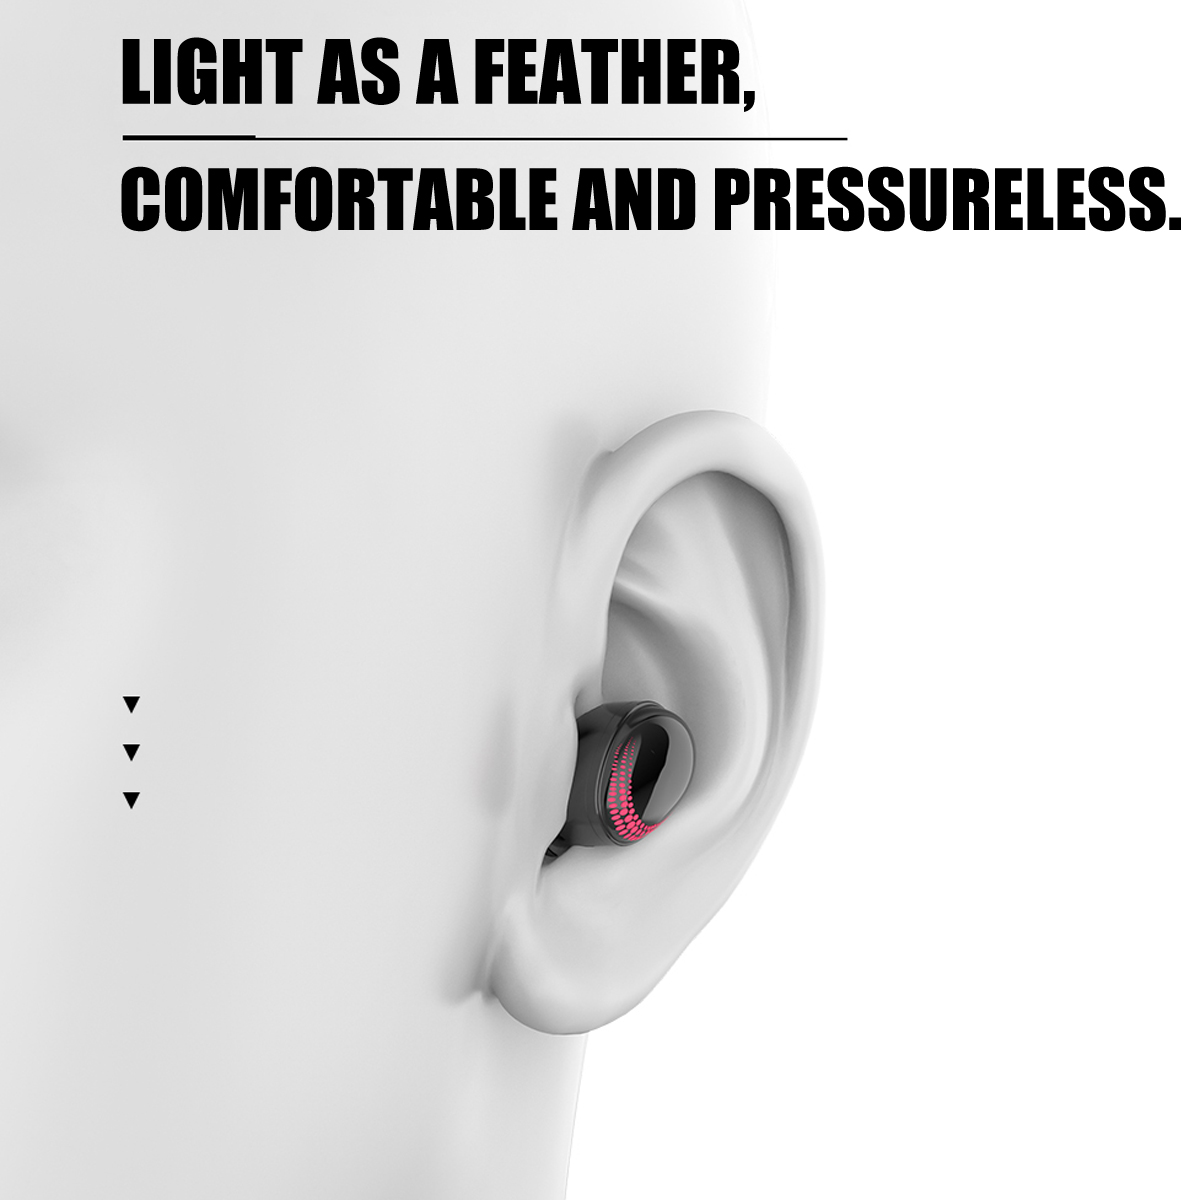 X10-TWS-Wireless-bluetooth-50-Earphone-LED-Power-Display-HiFi-Stereo-CNC-Noise-Cancelling-Earbuds-Sm-1657466-6